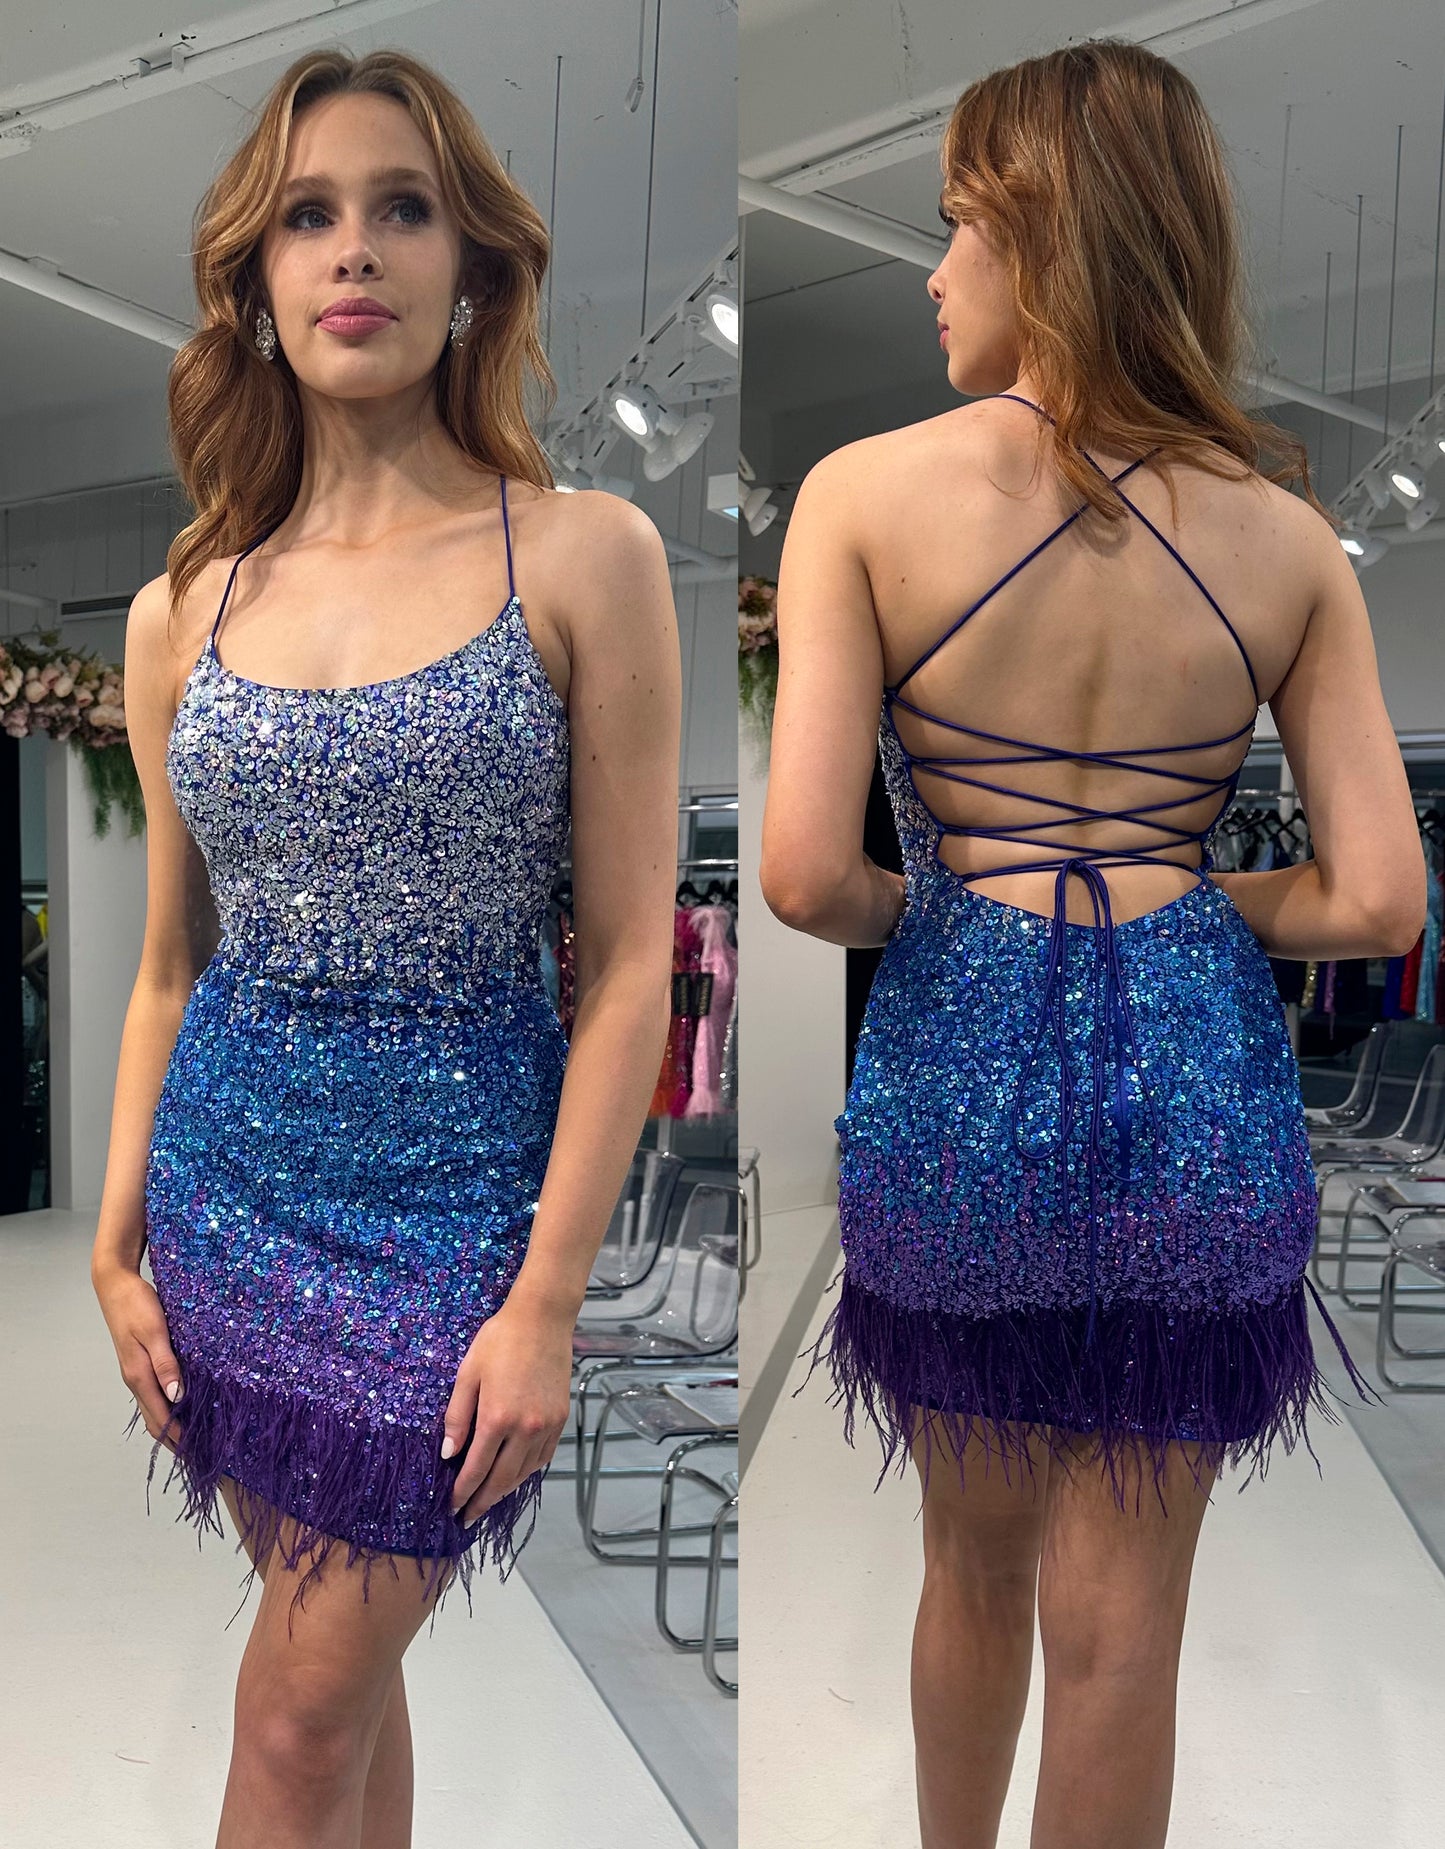 Primavera Couture 4023 Ombre Spaghetti Strap Scoop Neck Sequin Feather Detail Open Tie Back Short Homecoming Cocktail Dress. Look stunning in Primavera Couture's 4023 dress. Featuring ombre sequin detailing, a scoop neck, and feather trim, this short homecoming/cocktail dress is designed to impress. A tie-back, spaghetti straps, and a universally flattering silhouette enhance the modern look. Capture compliments when you opt for this timeless classic.